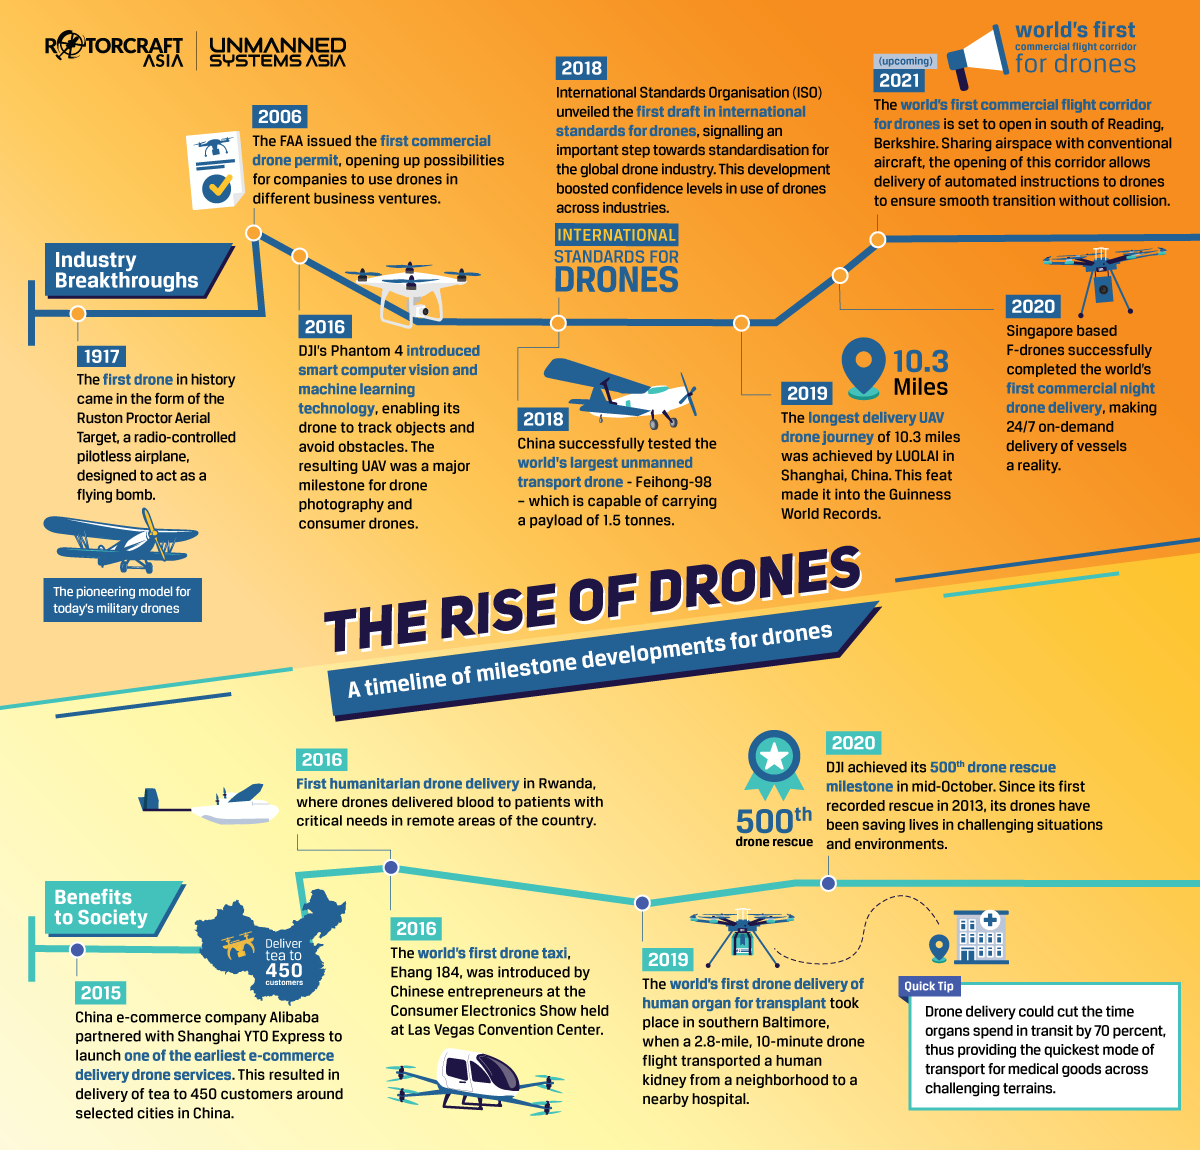 The rise of drones – A timeline of milestone developments for drones